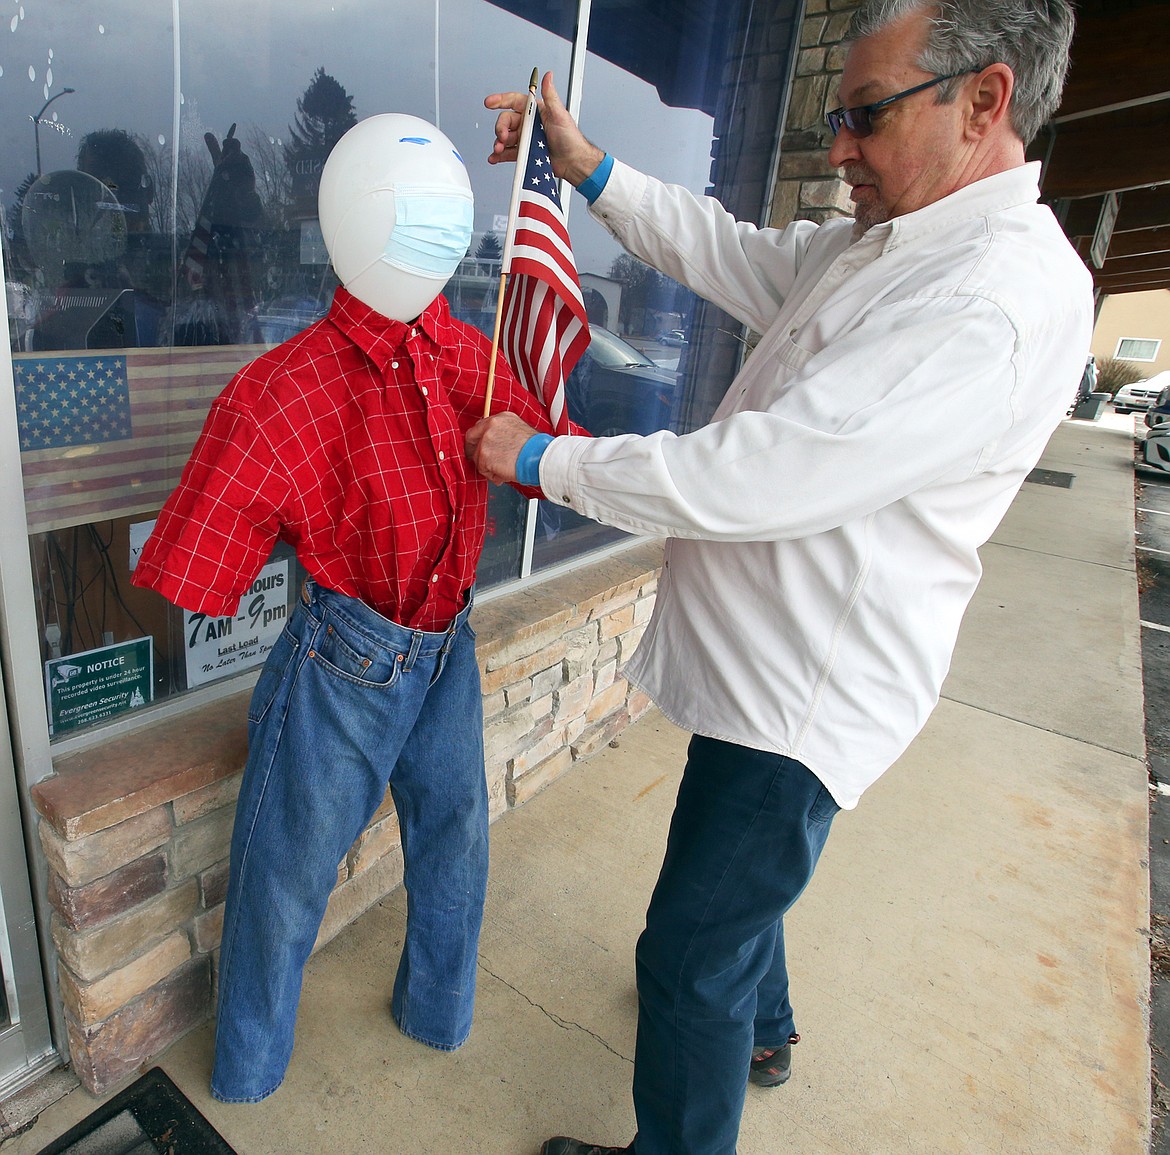 Pat O'Neill adjusts the frozen pants and shirt outside his business, Laundry & Cleaning Village, on Fourth Street in Coeur d'Alene.